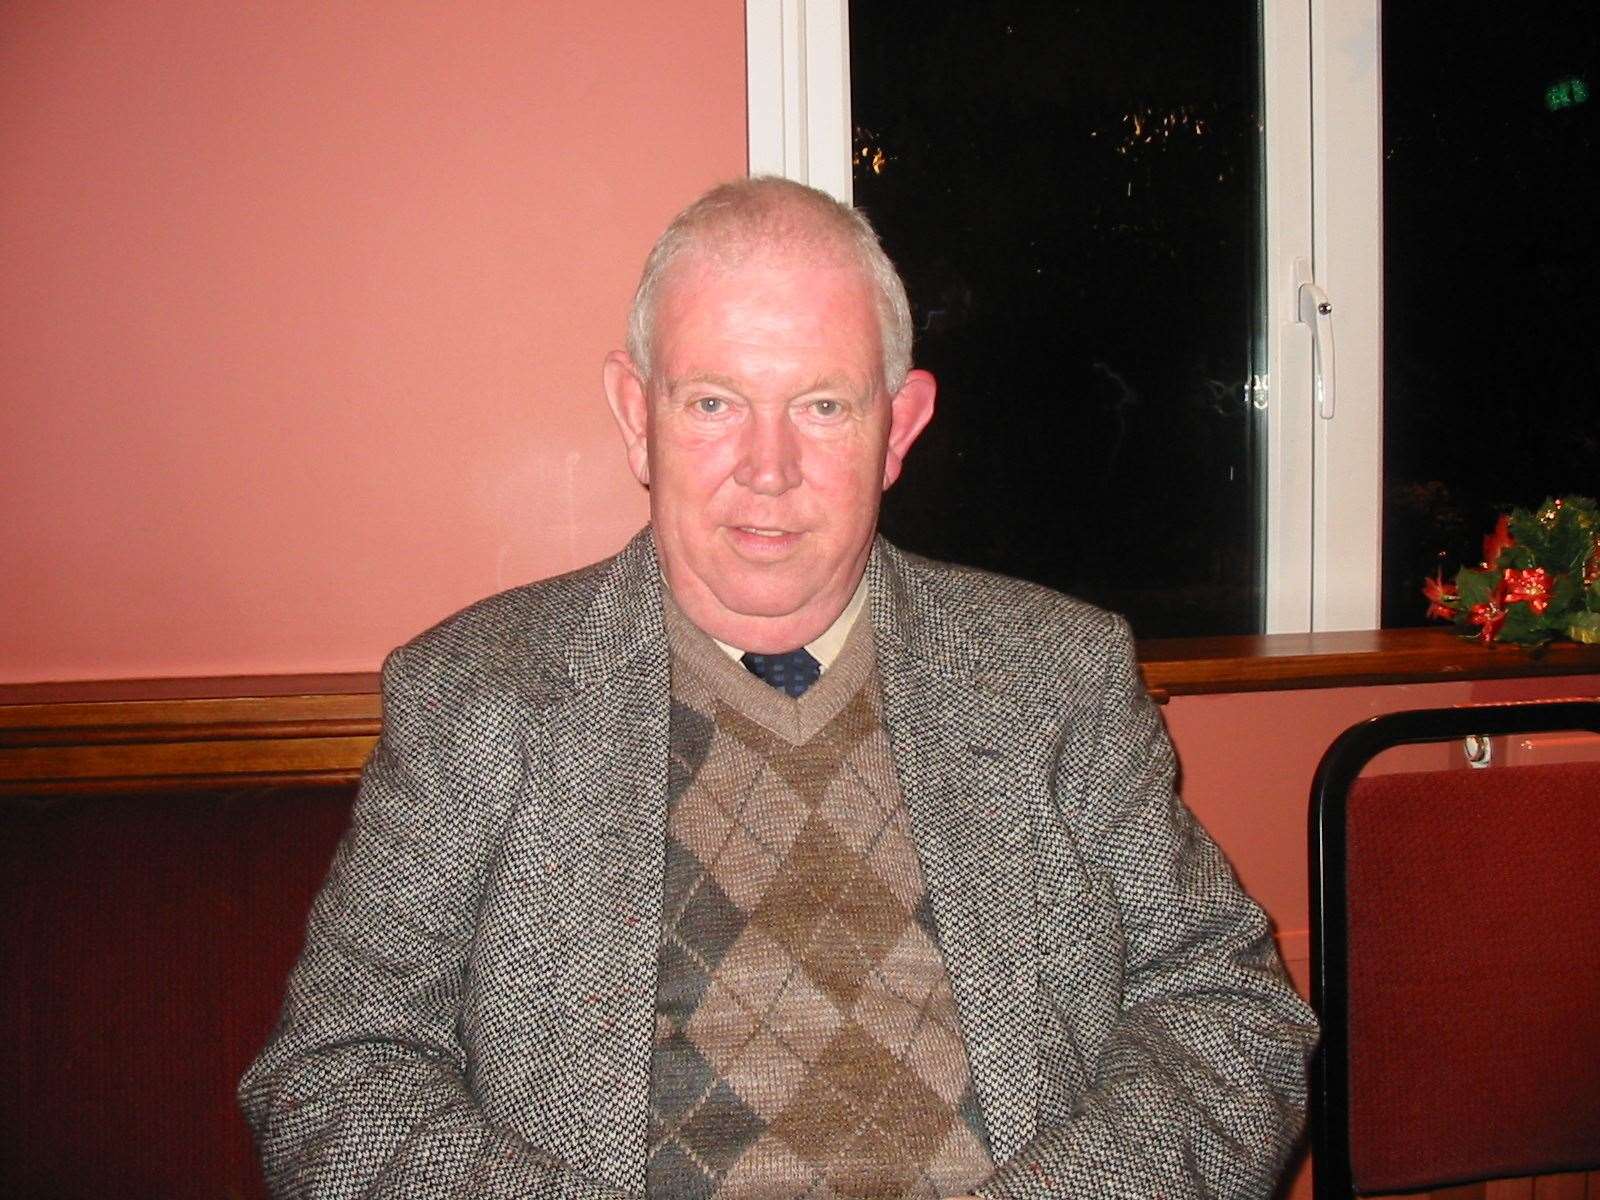 Colin Boswell pictured in 2002